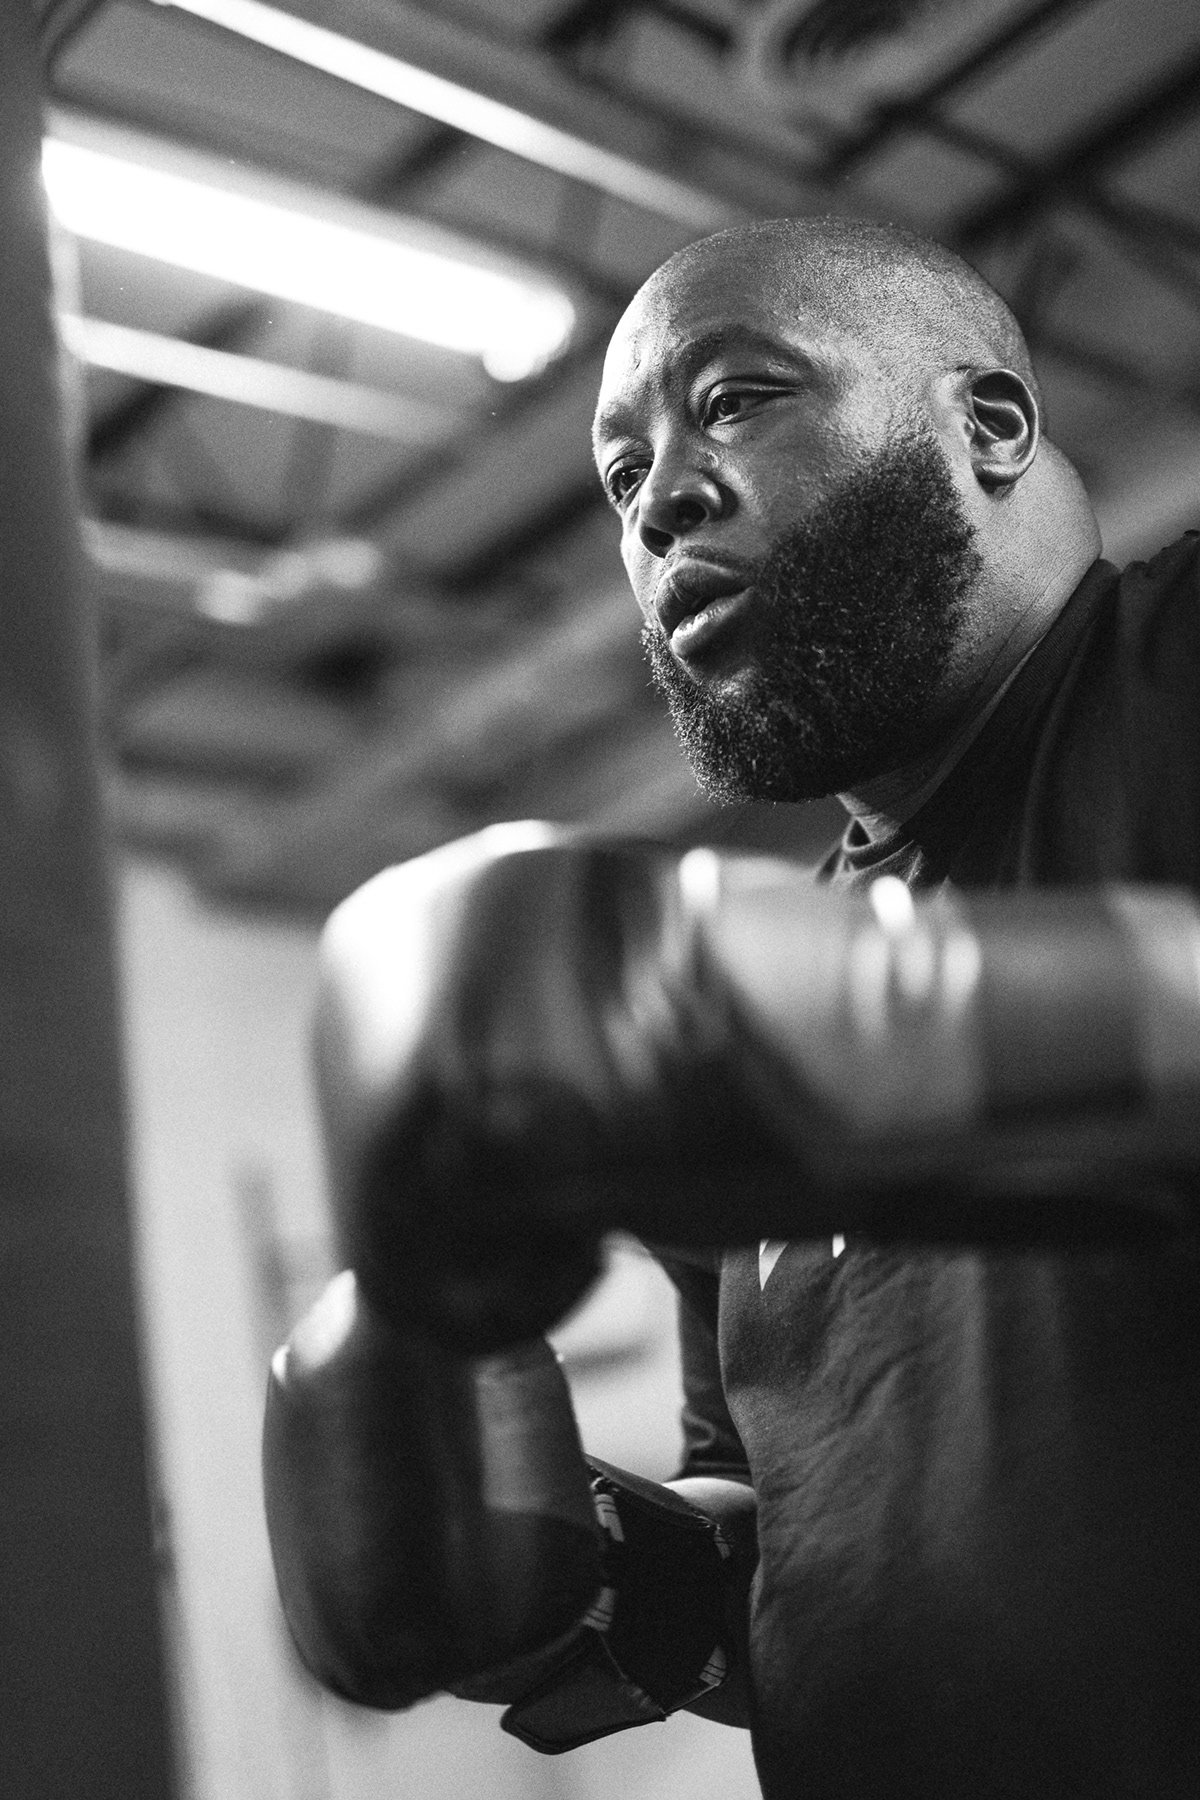 Killer Mike Run the jewels Under Armour workout fitness Weightlifting Health atlanta